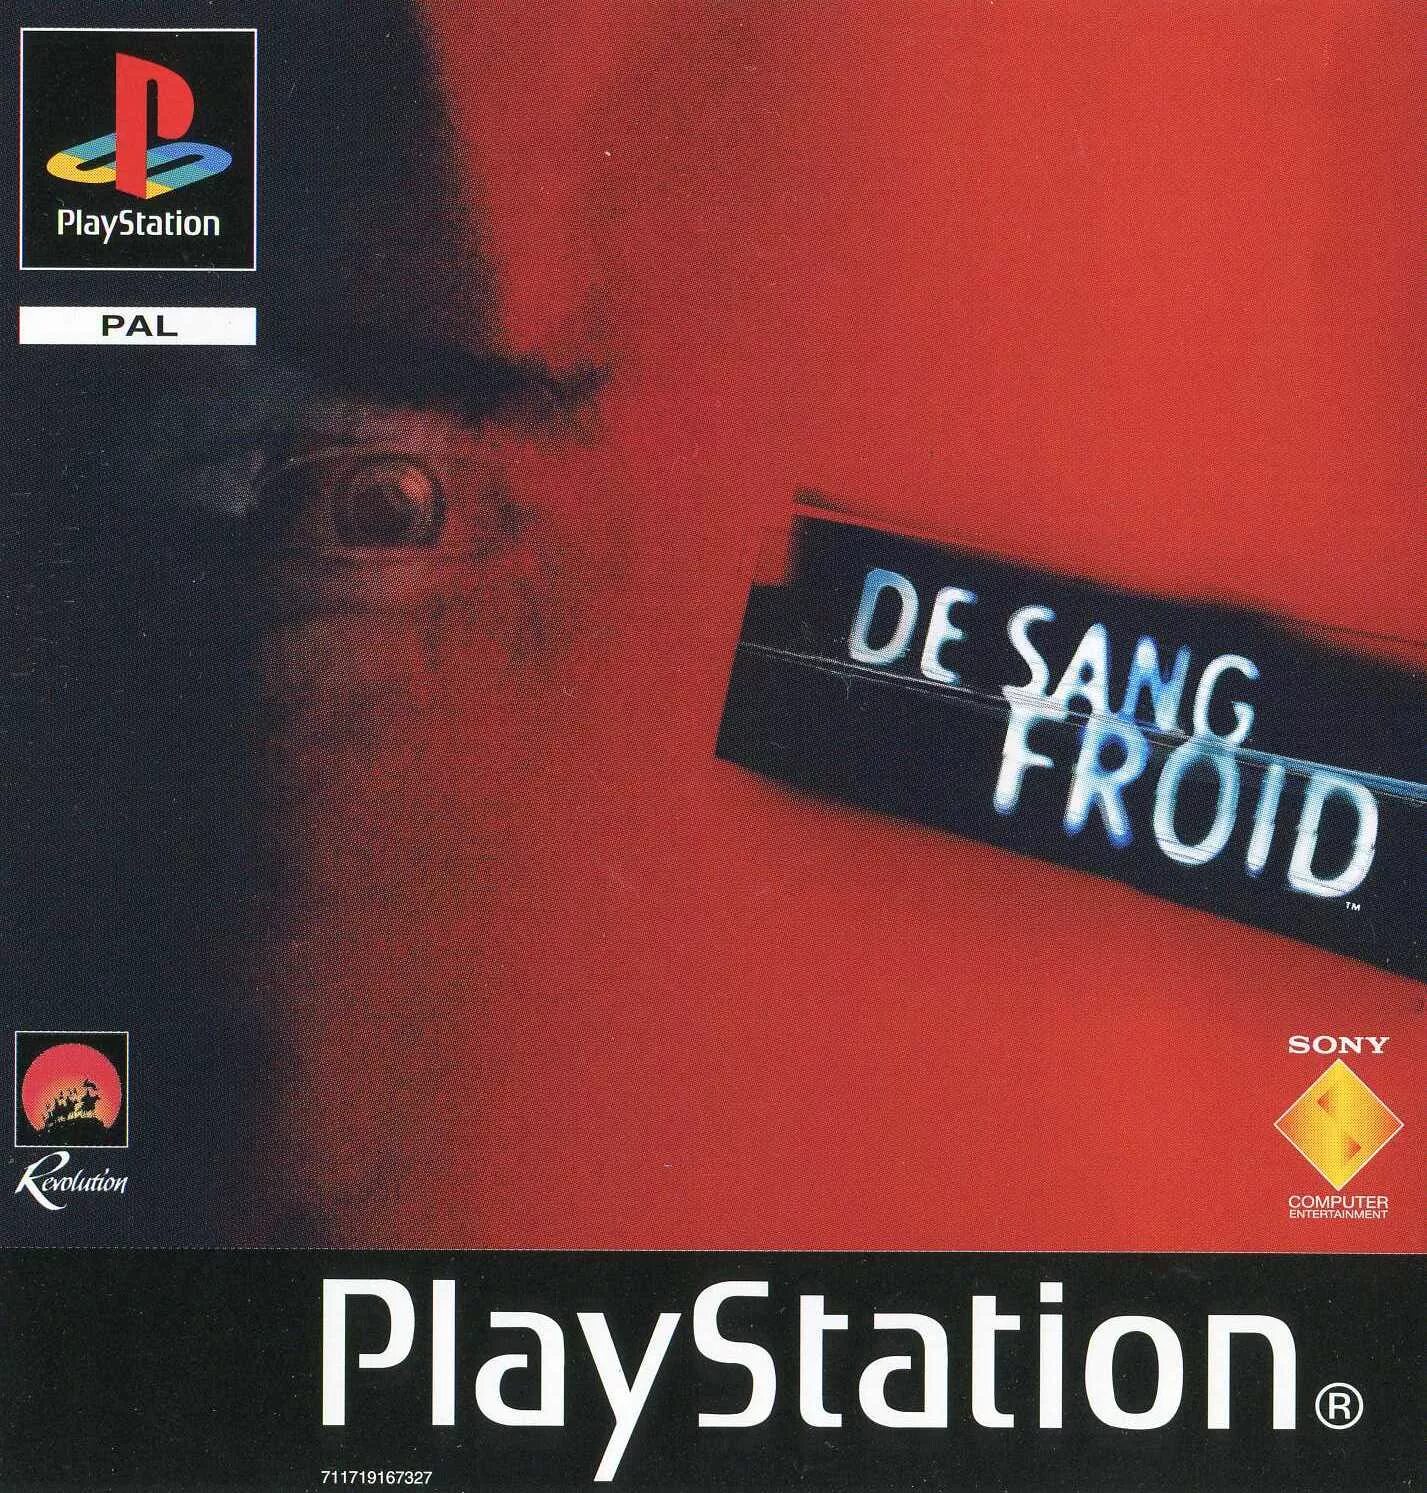 De sang. In Cold Blood ps1 обложка. In Cold Blood игра. Iron and Blood ps1. In-Cold-Blood ps1 Cover NTSC UC.